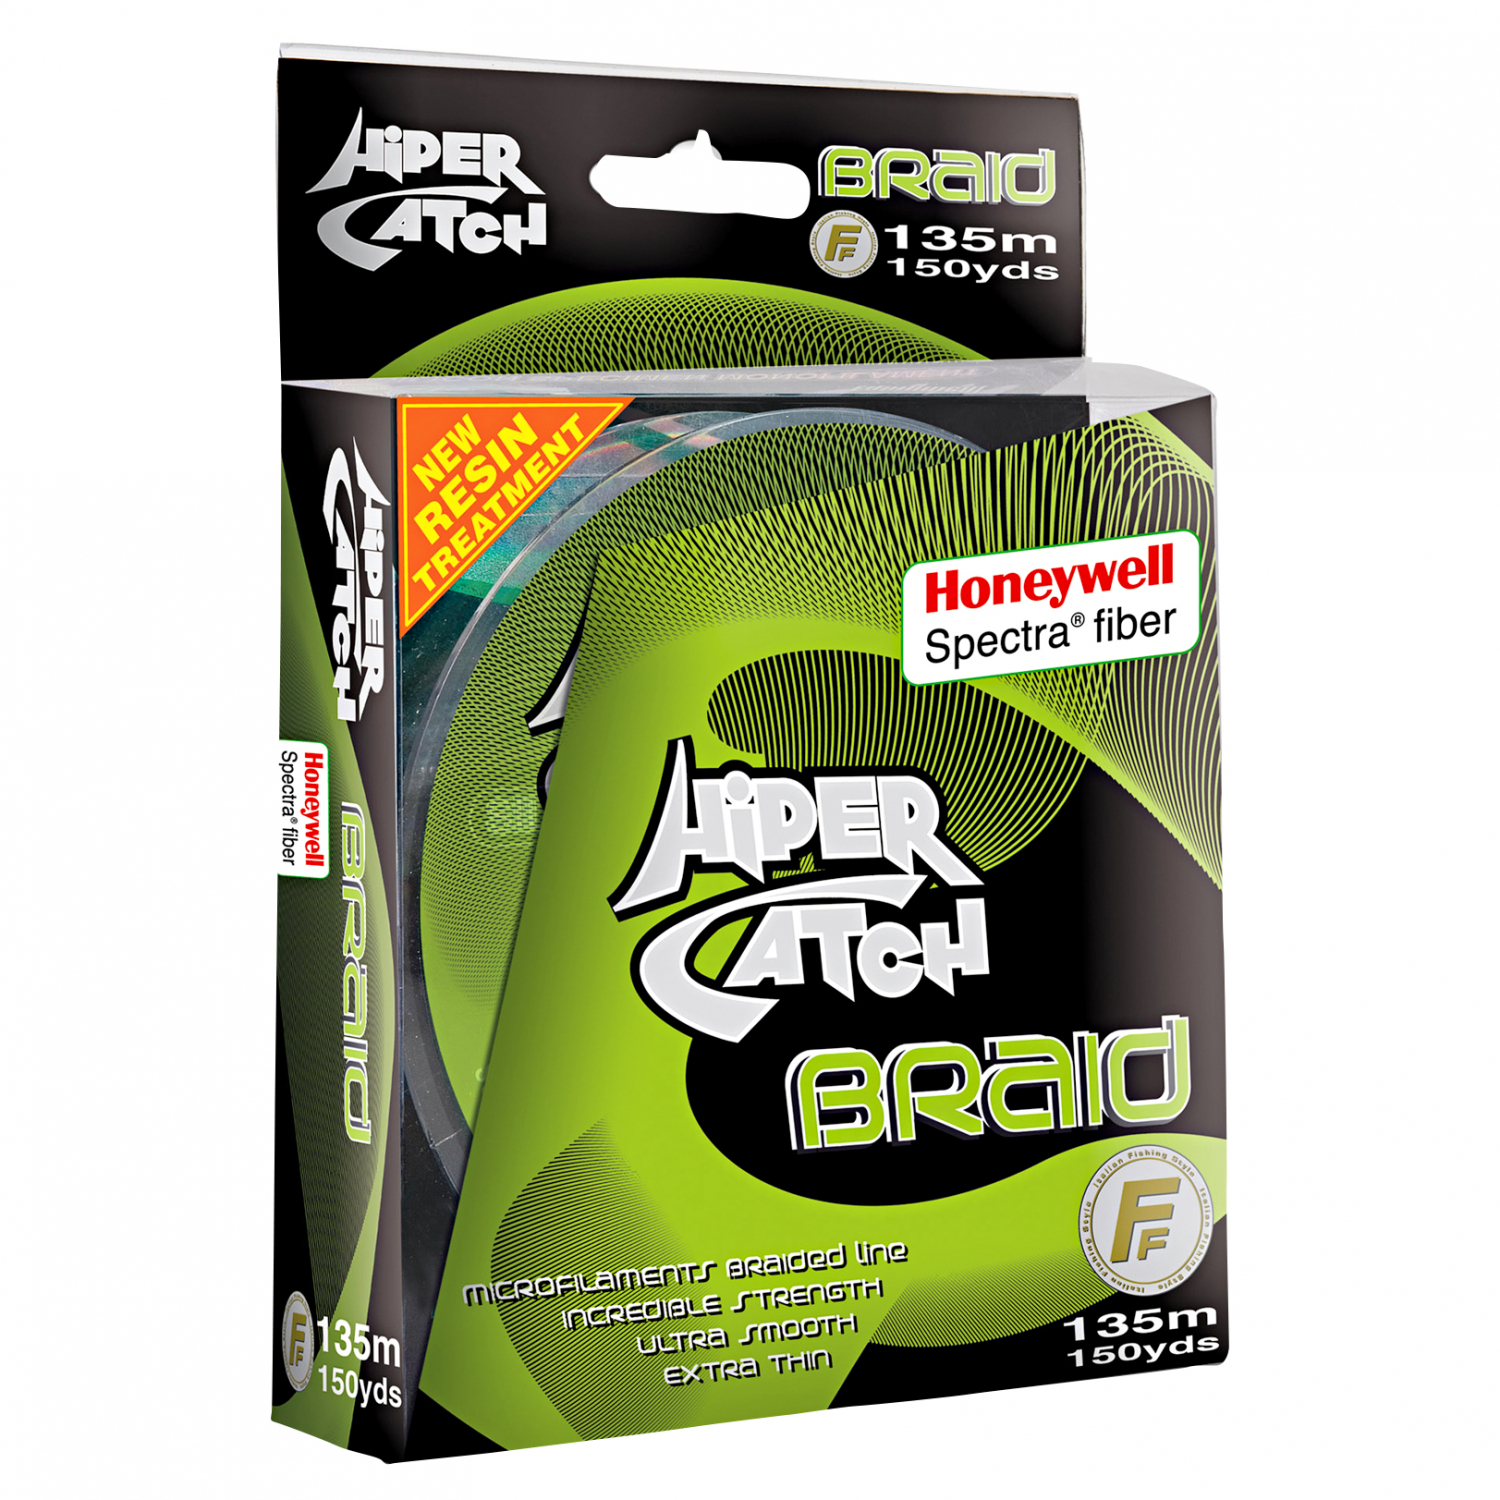 Lineaeffe Lineaeffe Hiper Catch Spectra Braid Fishing Lines 